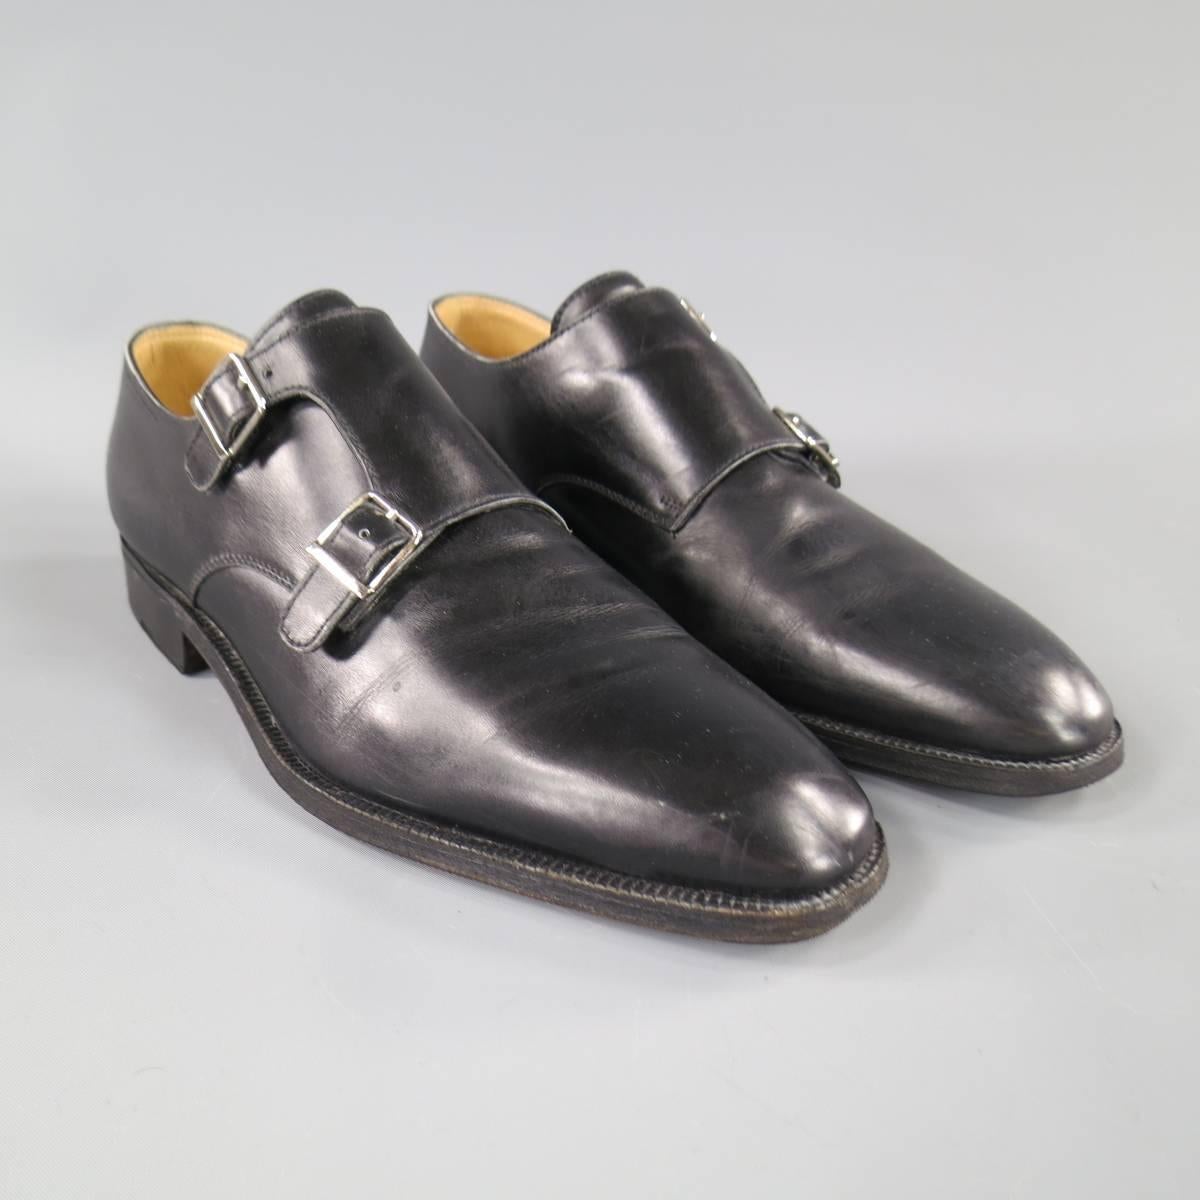 These vintage GRAVATI for WILKES BASHFORD dress shoes come in a smooth black leather with a double monk strap closure and semi rubberized sole. Made in Italy.
 
Good Pre-Owned Condition.
Marked: 8.5 M
 
Measurements:
 
Length: 11.5